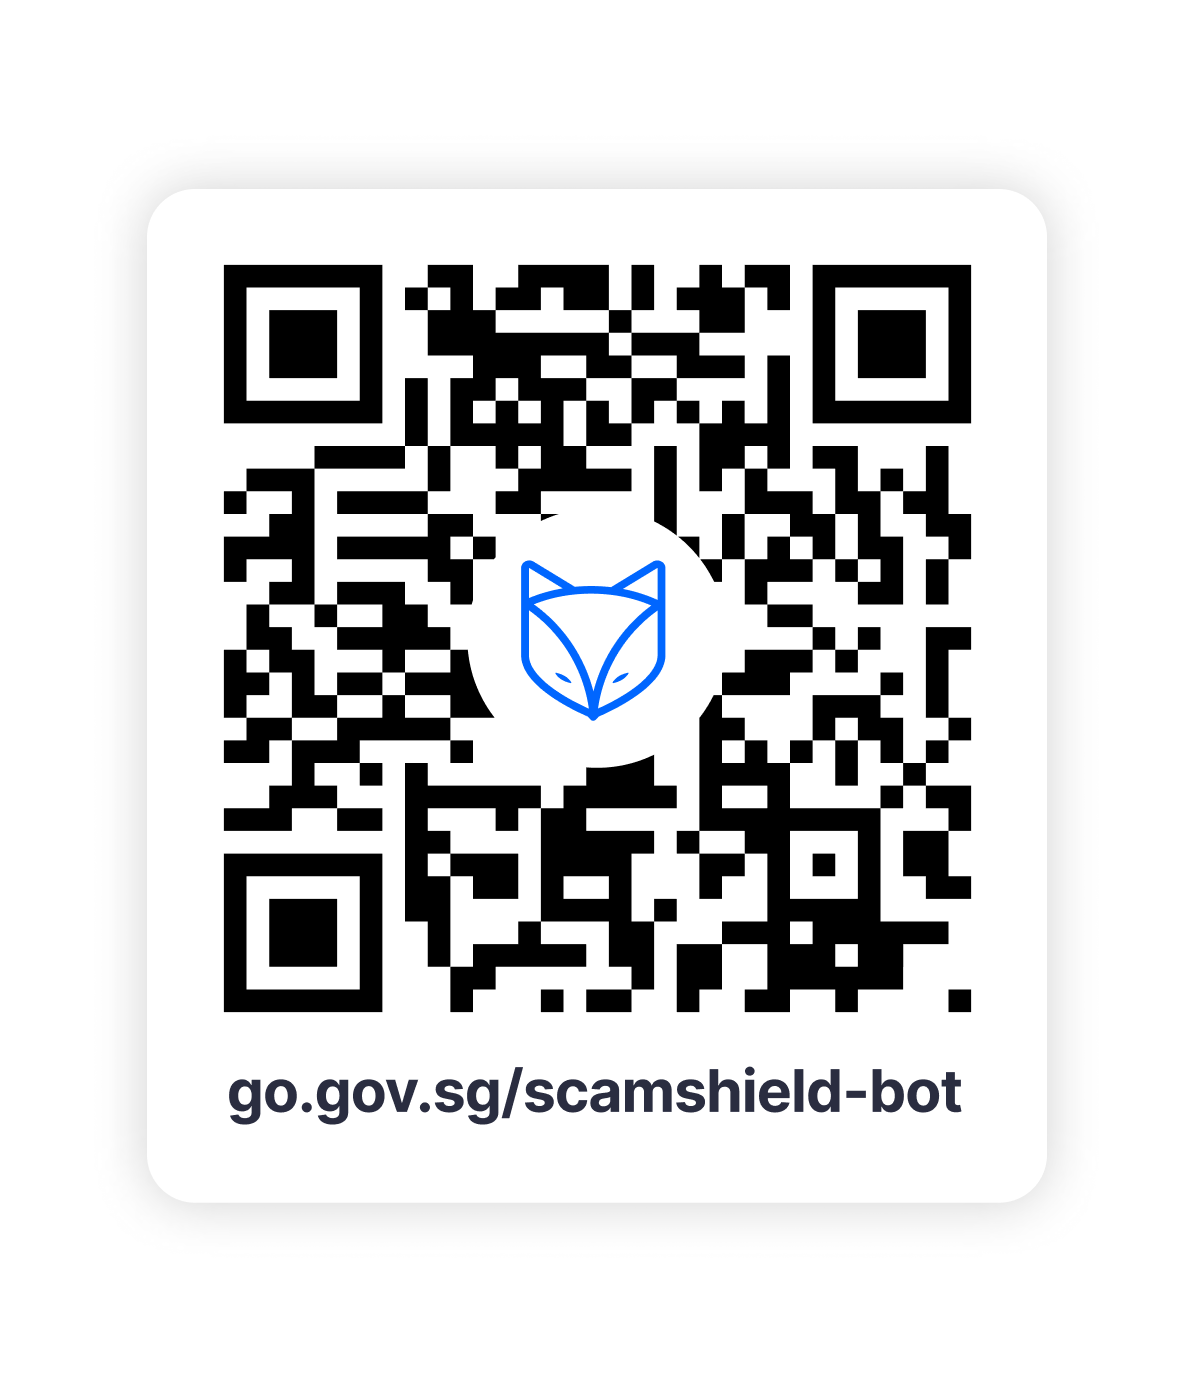 <qr code that will lead to scamshield bot>